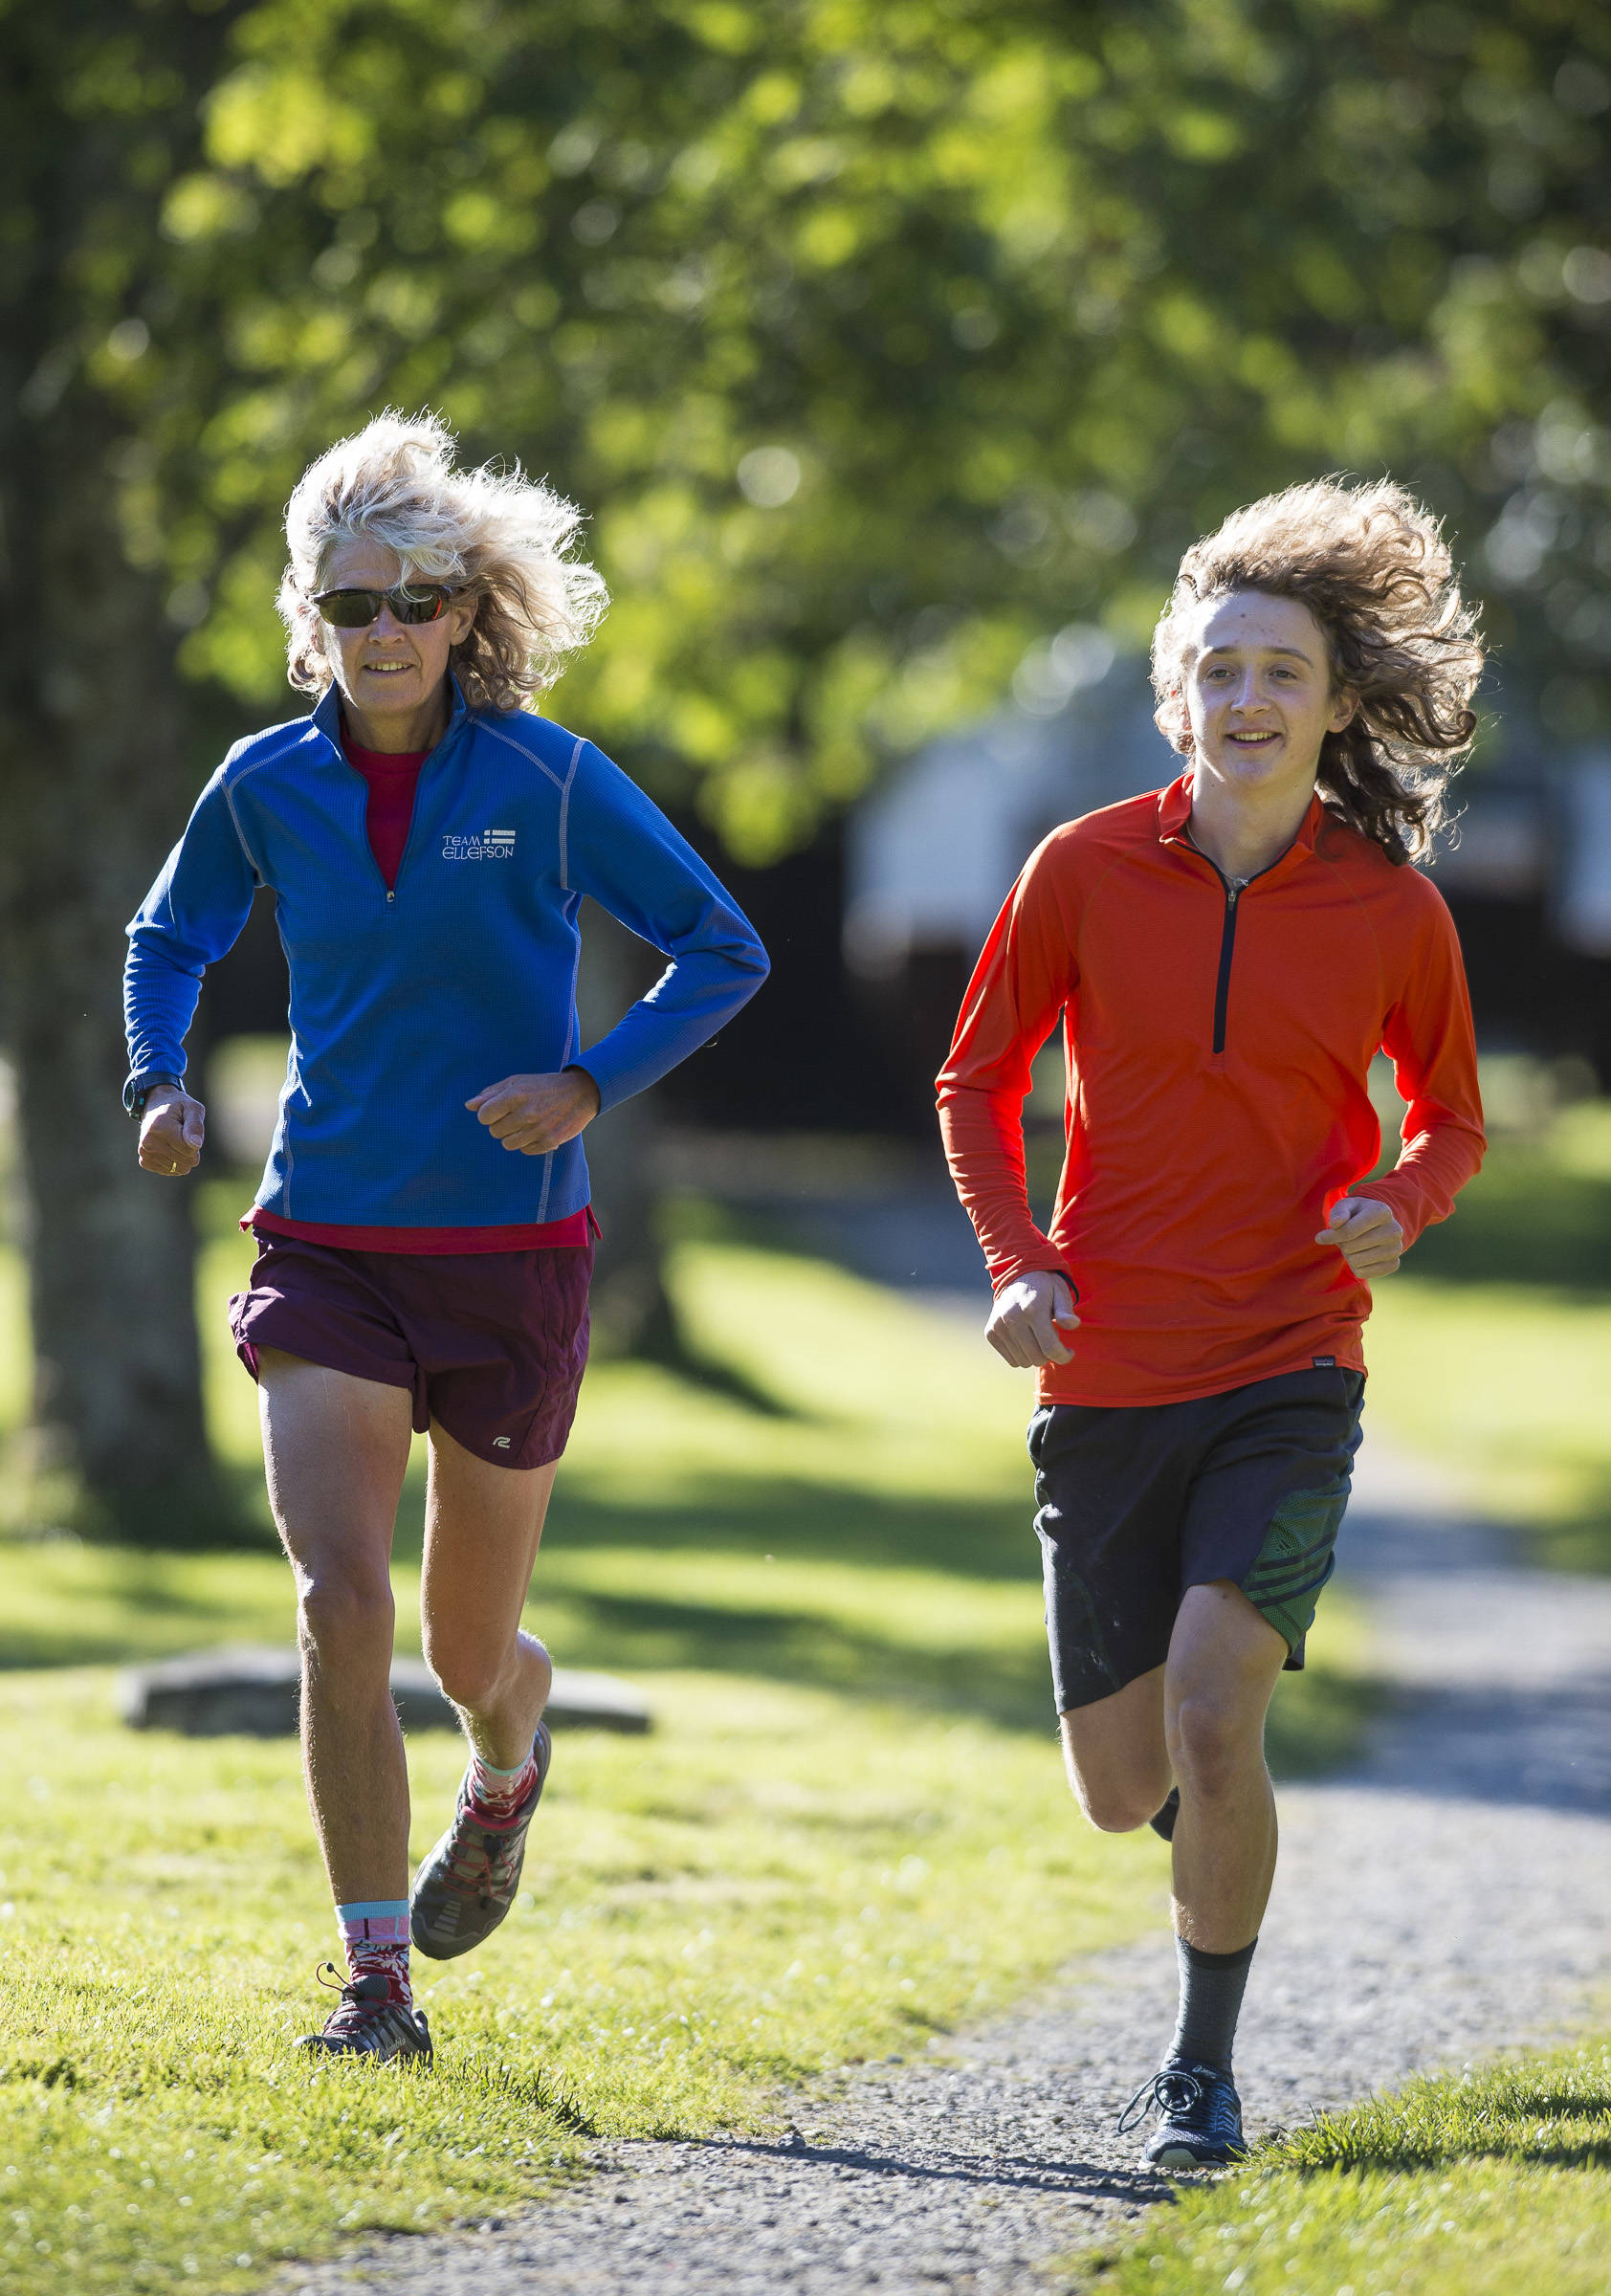 Merry Ellefson runs with her son, Arne Ellefson-Carnes, during Juneau-Douglas High School cross country practice on Wednesday, Sept. 19, 2018. Merry is a co-coach for the team and Arne is a senior. (Michael Penn | Juneau Empire)